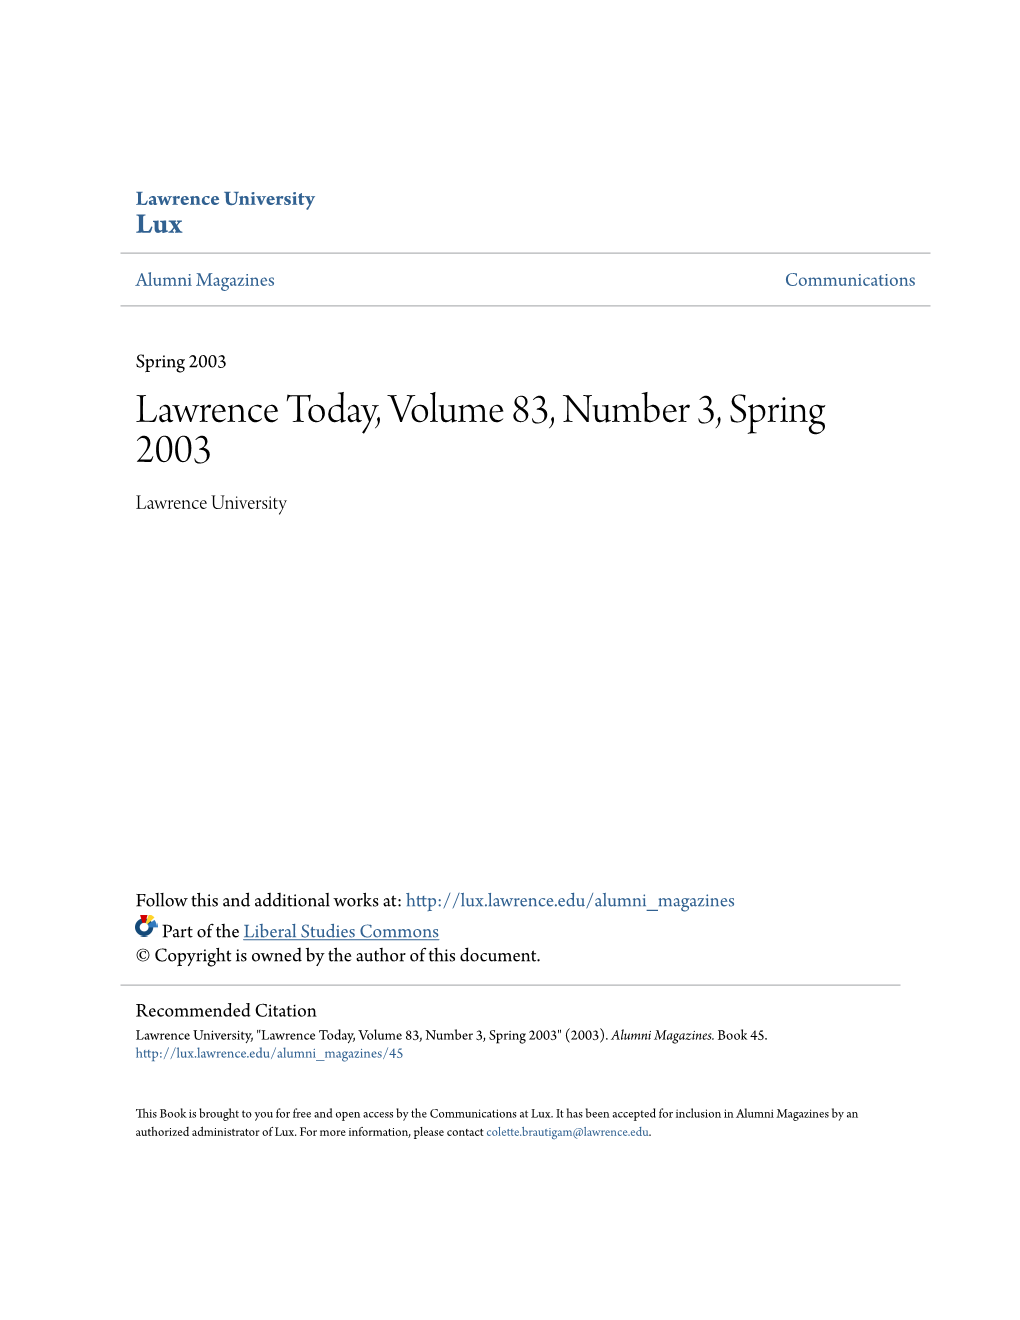 Lawrence Today, Volume 83, Number 3, Spring 2003 Lawrence University